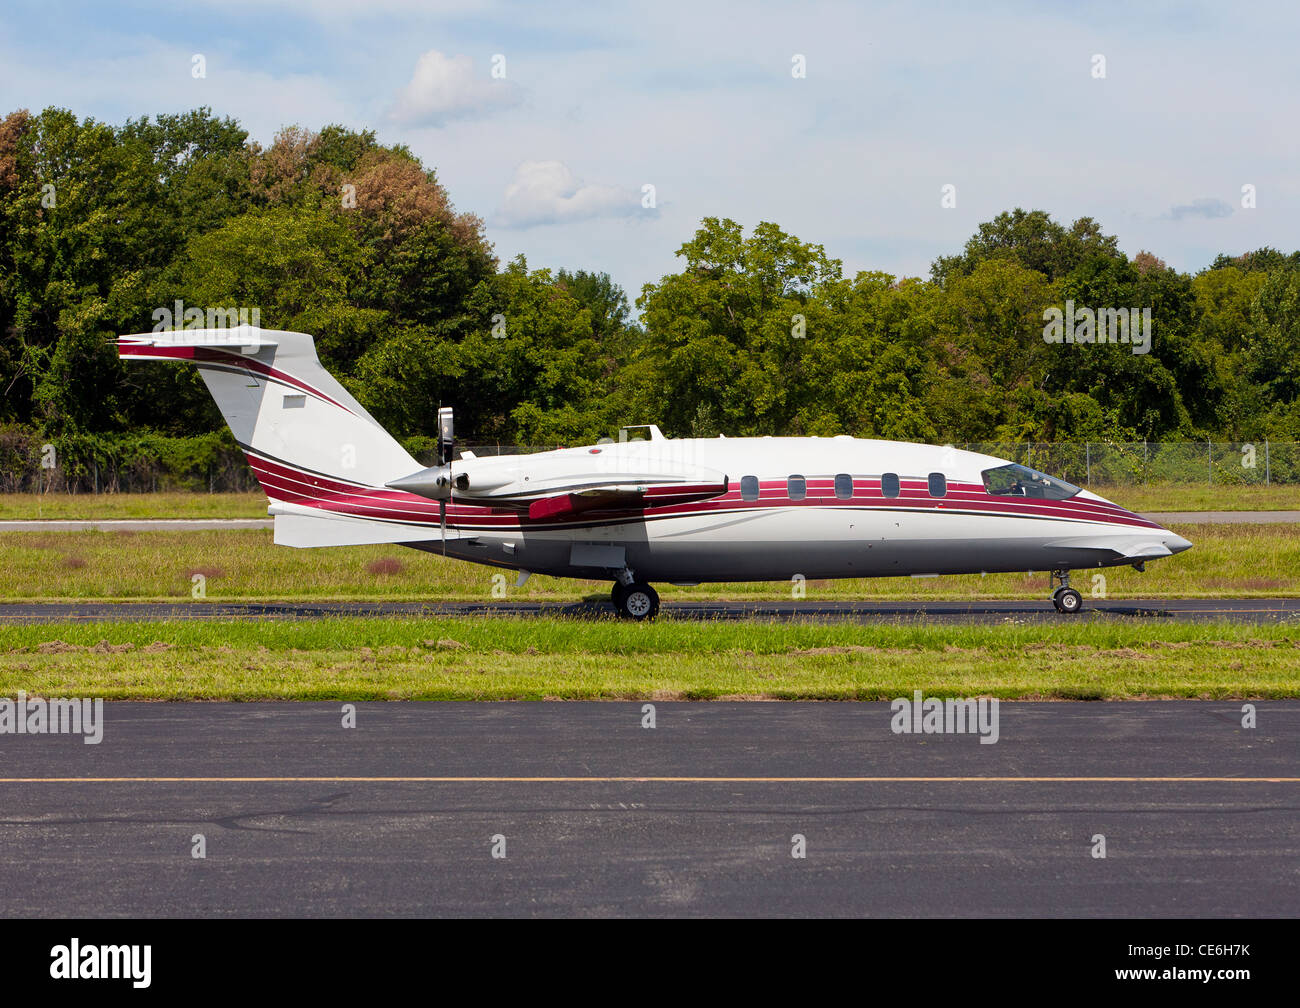 A Piaggio Aero Industries Spa plane taxing on the runway and getting ready for flight in the sky. Stock Photo